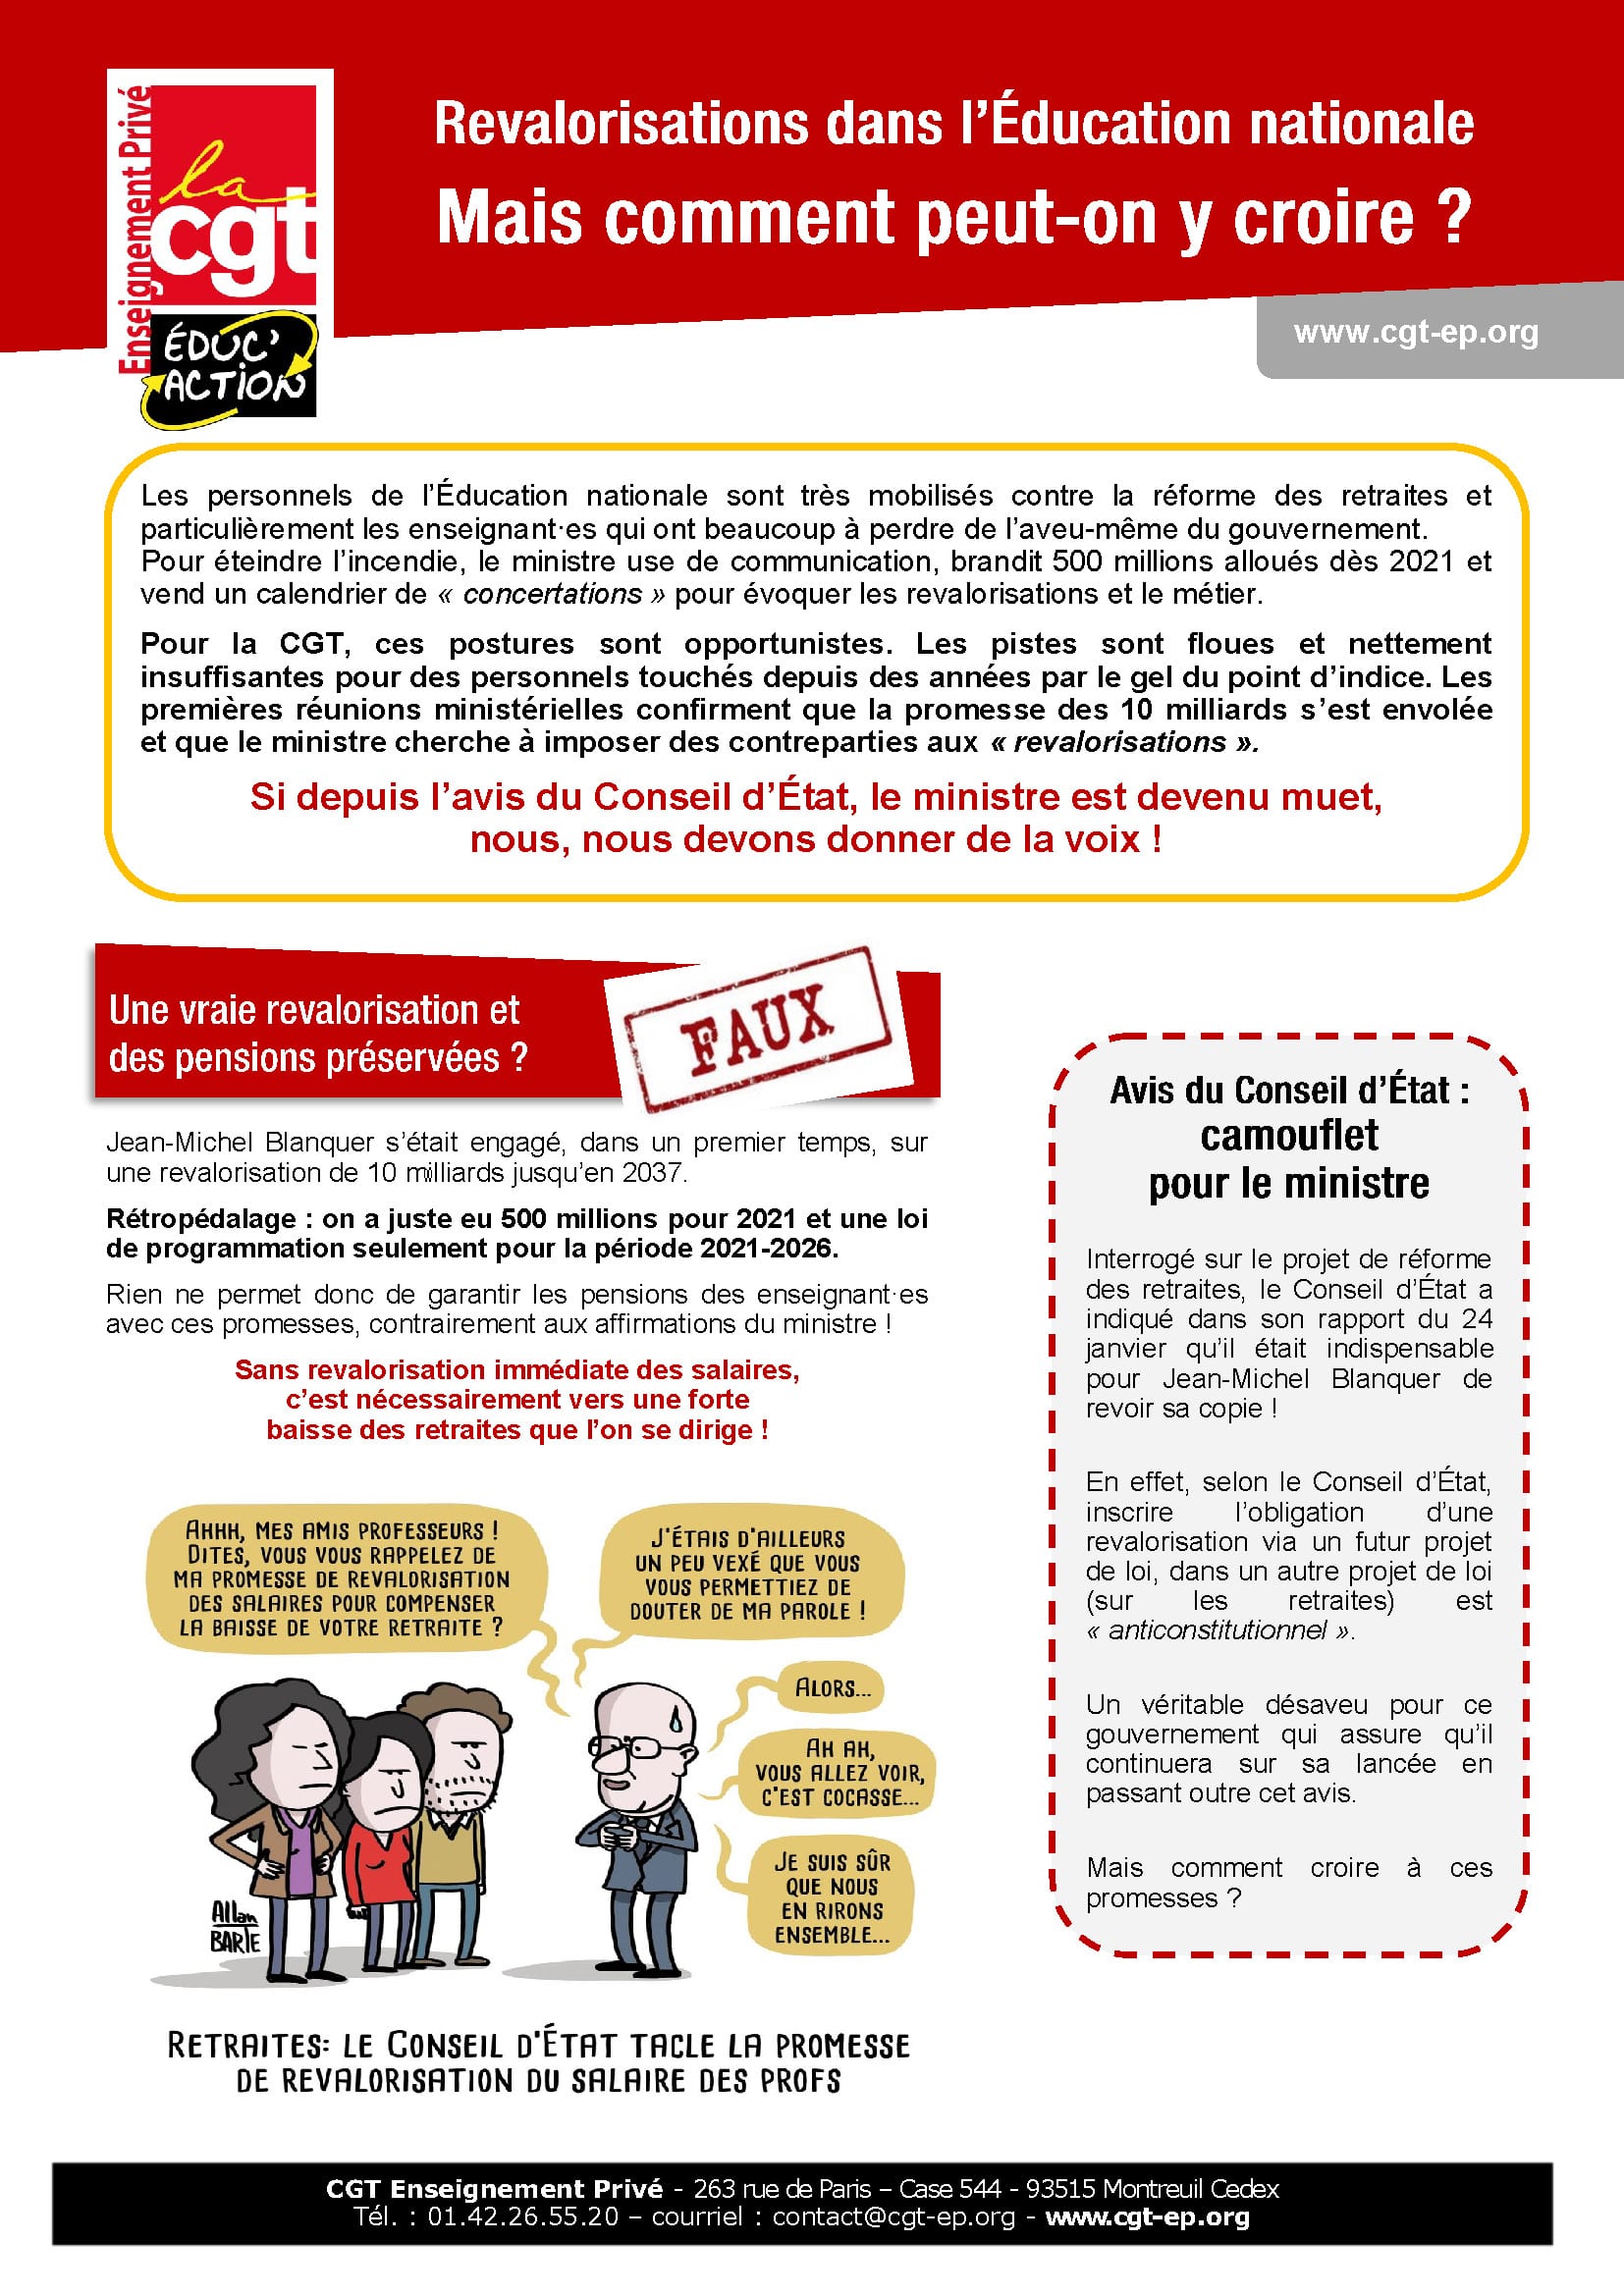 http://cgt-ep.reference-syndicale.fr/files/2020/02/2020-02-06_tract_retraites_6_fevrier_Page_1.jpg